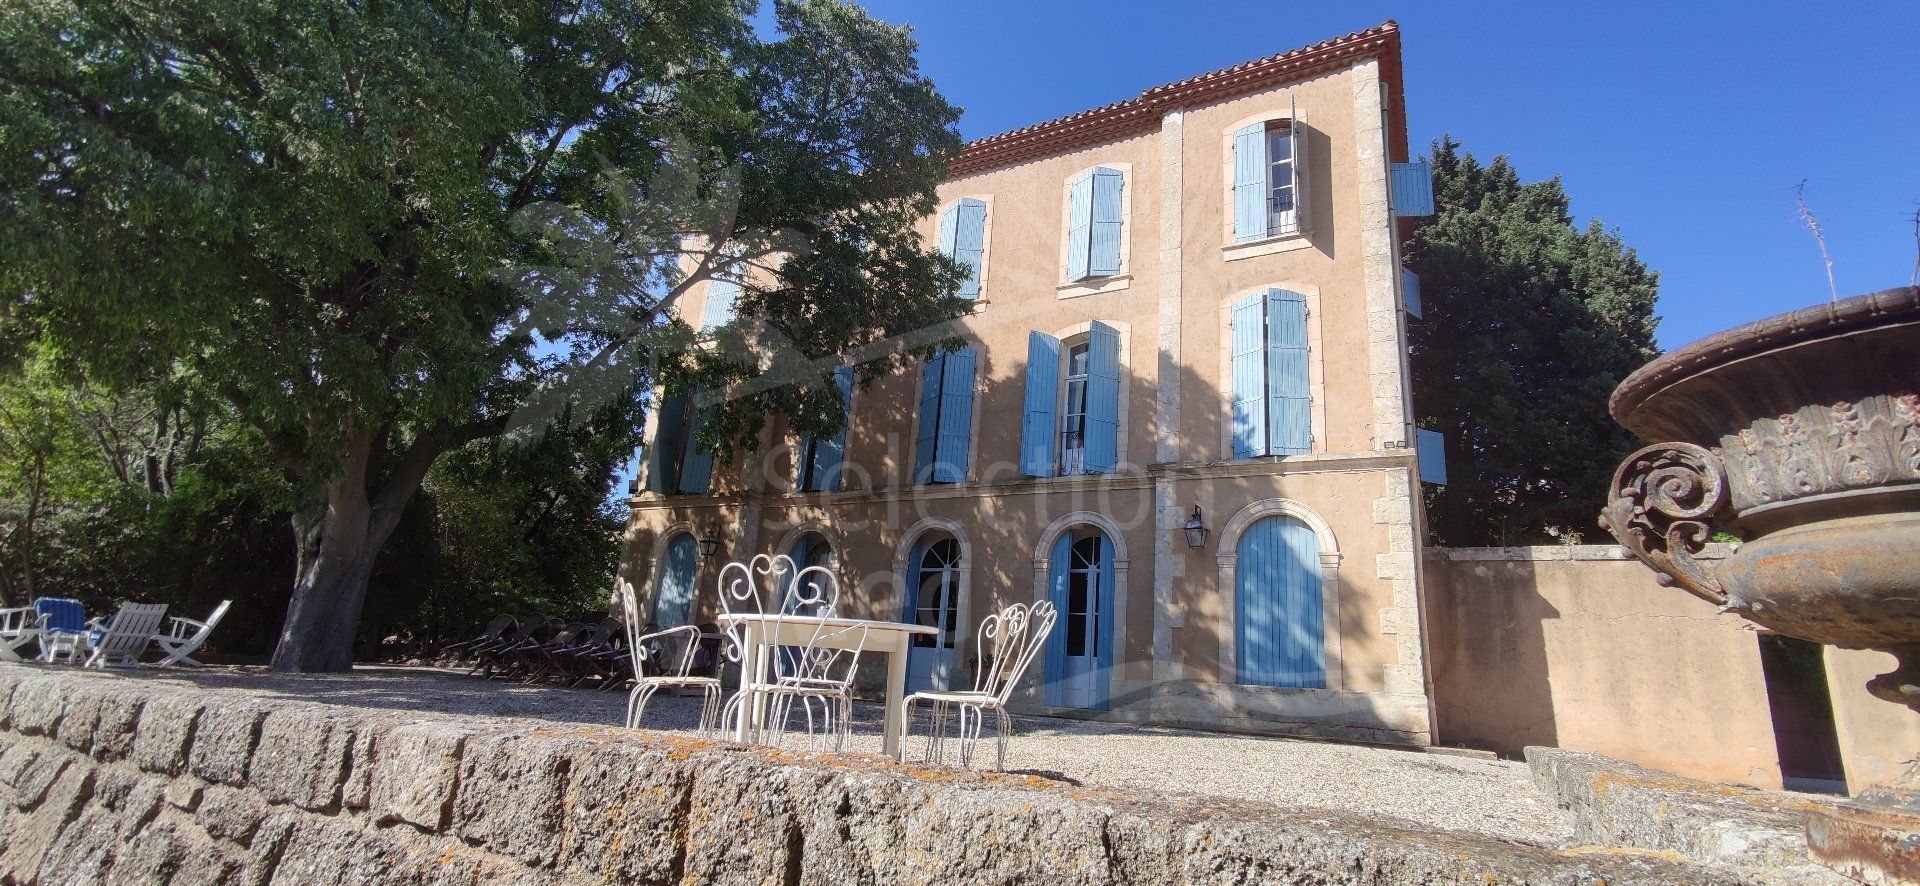 Exceptional mansion with 1.7ha park, 500m2 of living space, 350m2 outbuilding, 5km from Beziers, 10 mins from the beach